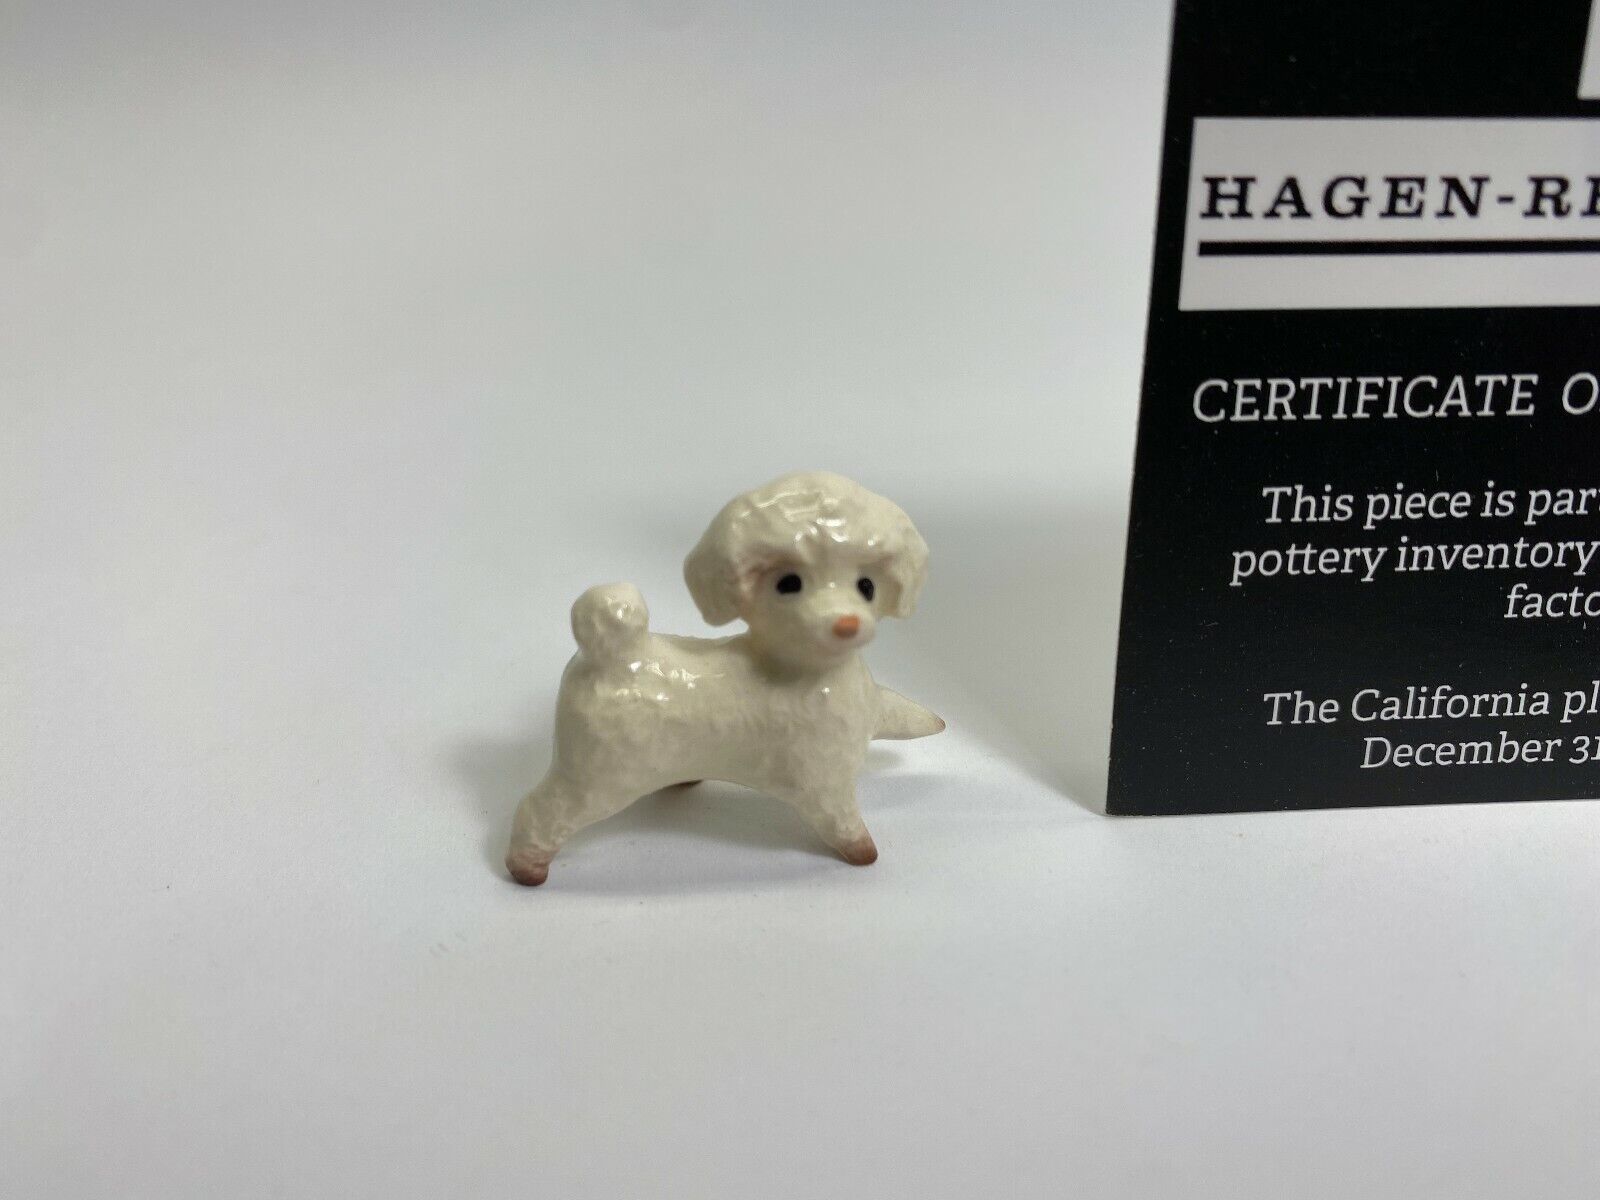 Hagen Renaker #12 3230 NOS Toy Poodle 2021 Last of the Factory Stock